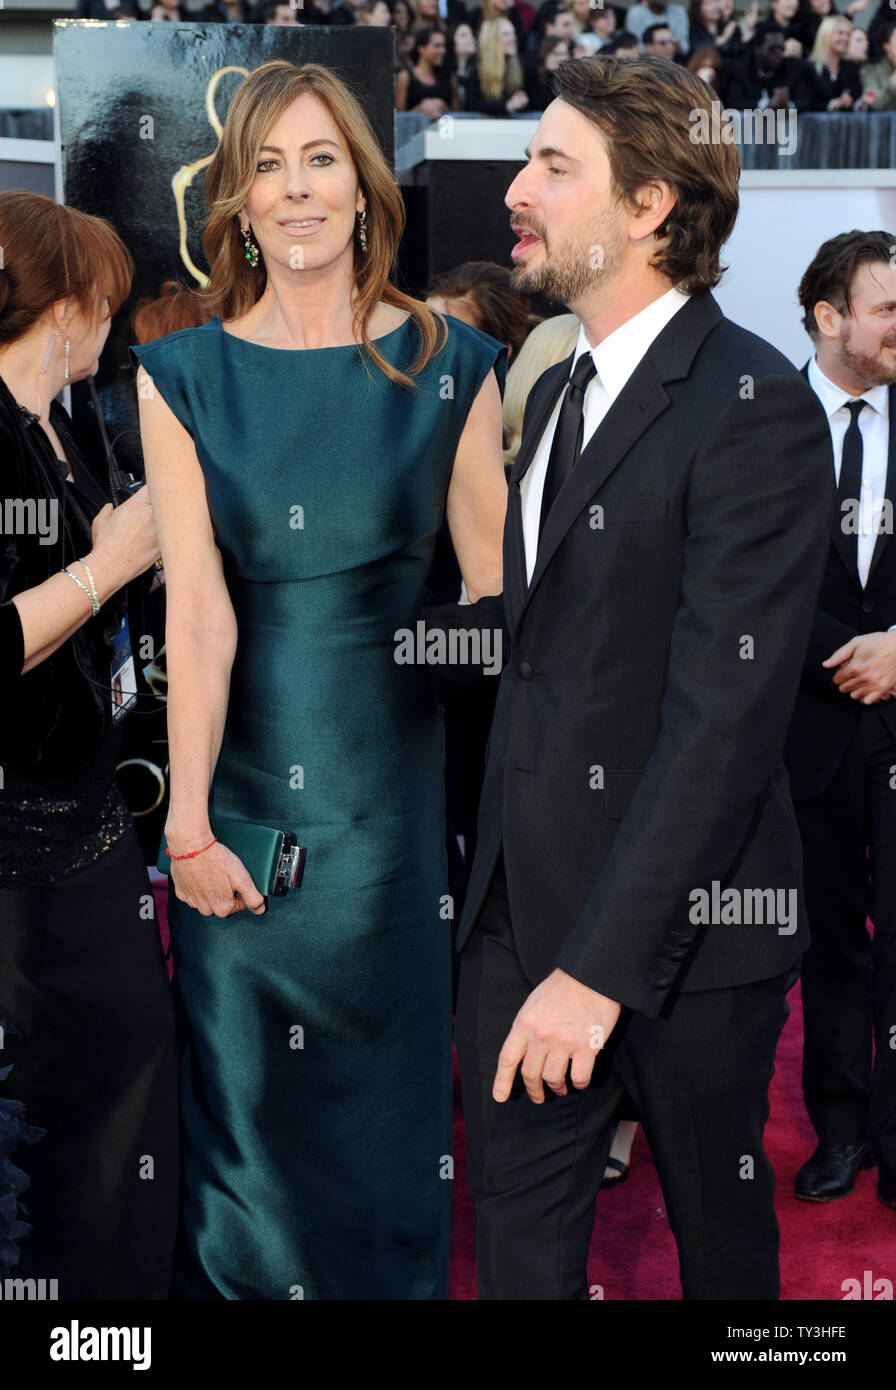 Kathryn Bigelow and Mark Boal arrive on the red carpet at the 85th Academy Awards at the Hollywood and Highlands Center in the Hollywood section of Los Angeles on February 24, 2013.   UPI/Kevin Dietsch Stock Photo